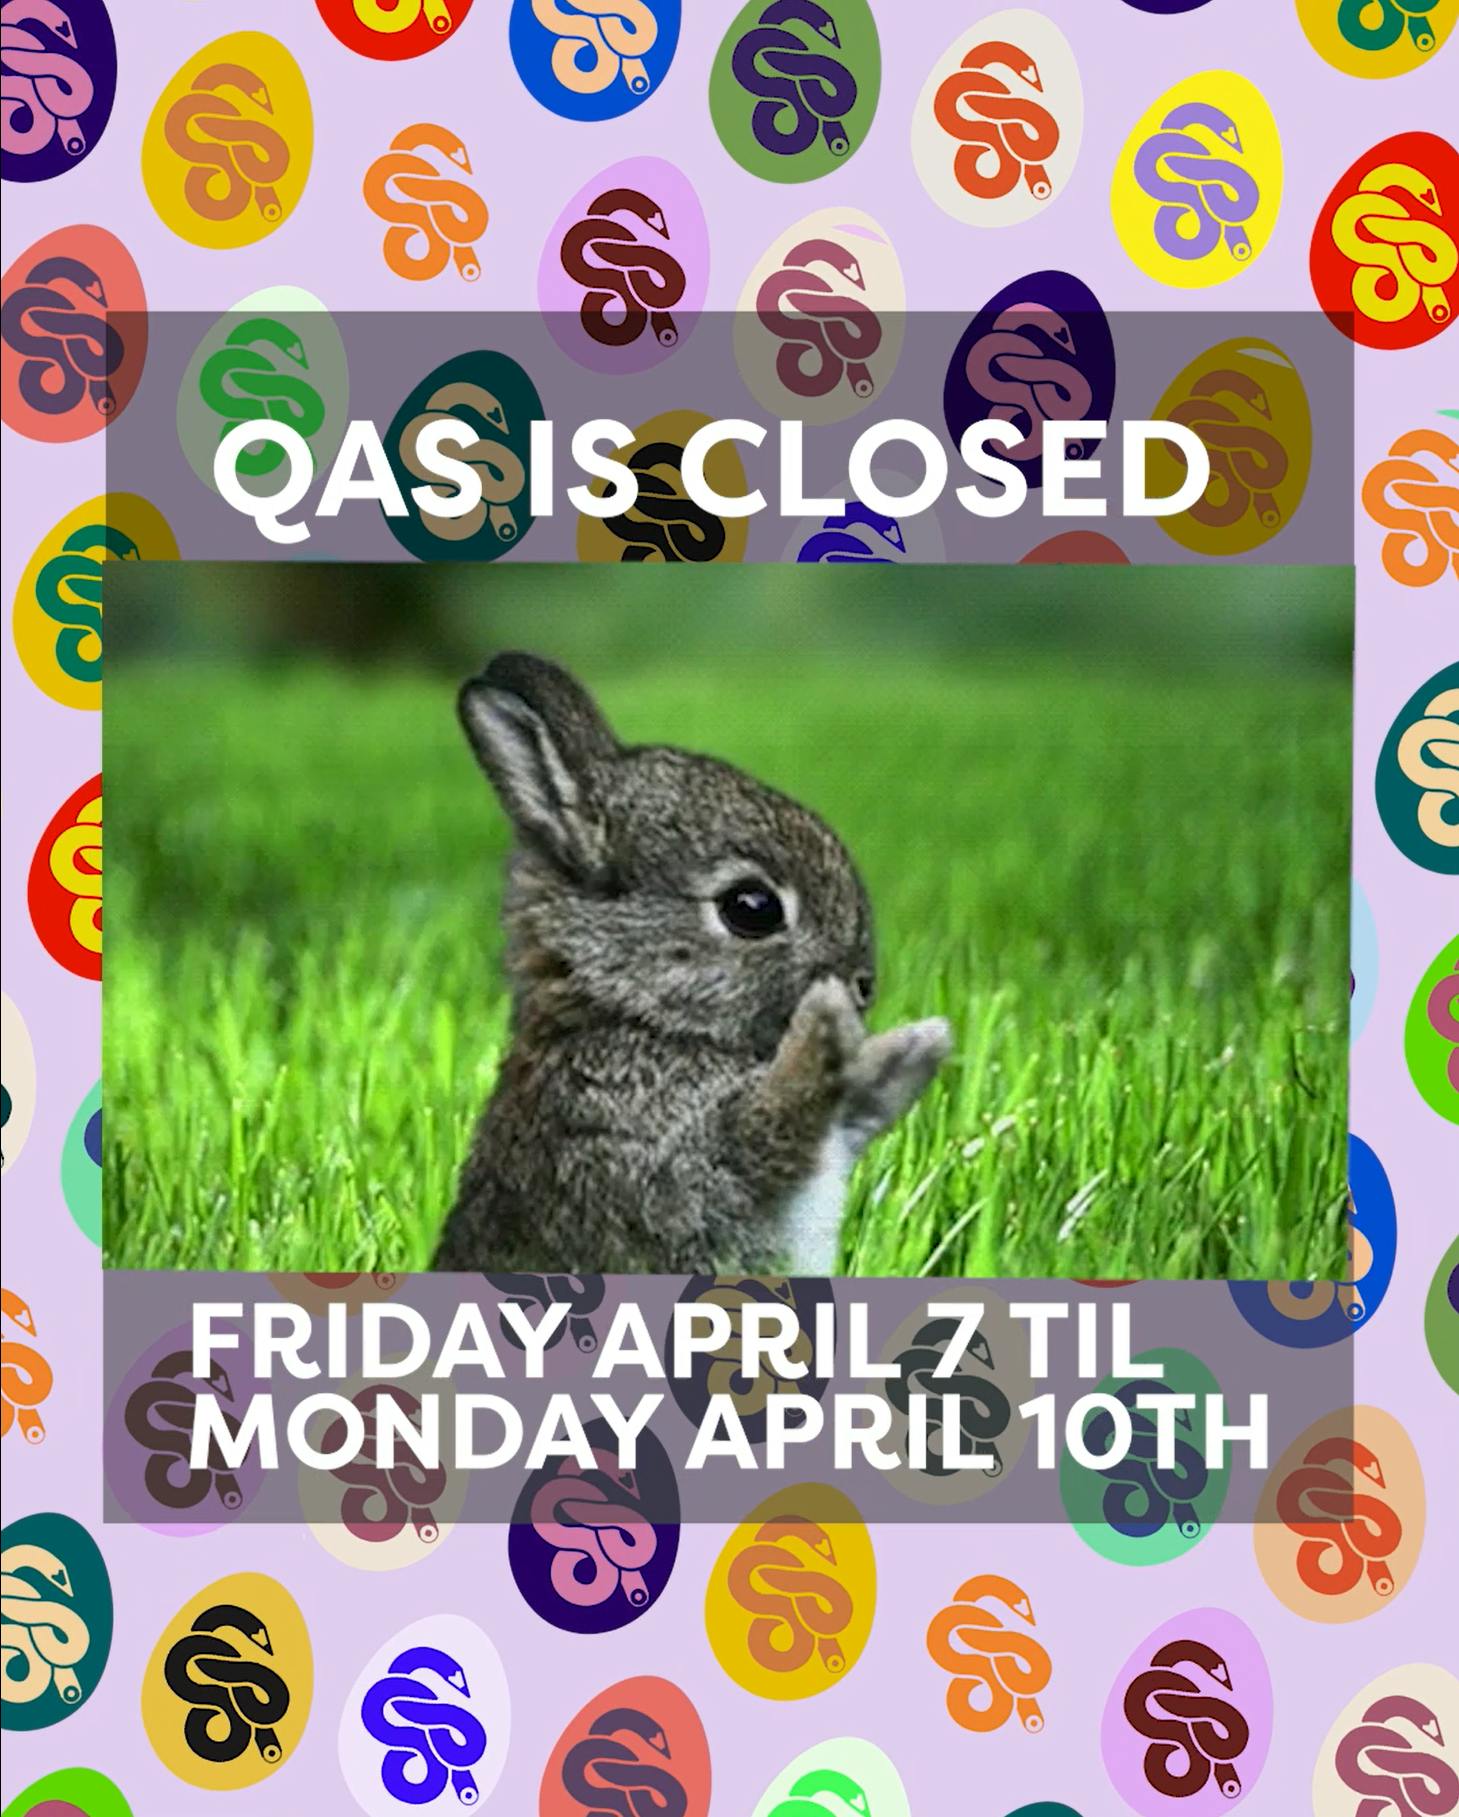 an image with text. The image has a tiled background of the Quickdraw pencil logo encased in an egg-shaped circle, and an overlay shows text and a picture of a small bunny. 

Text reads, "QAS IS CLOSED FRIDAY APRIL 7 TIL MONDAY APRIL 10TH"